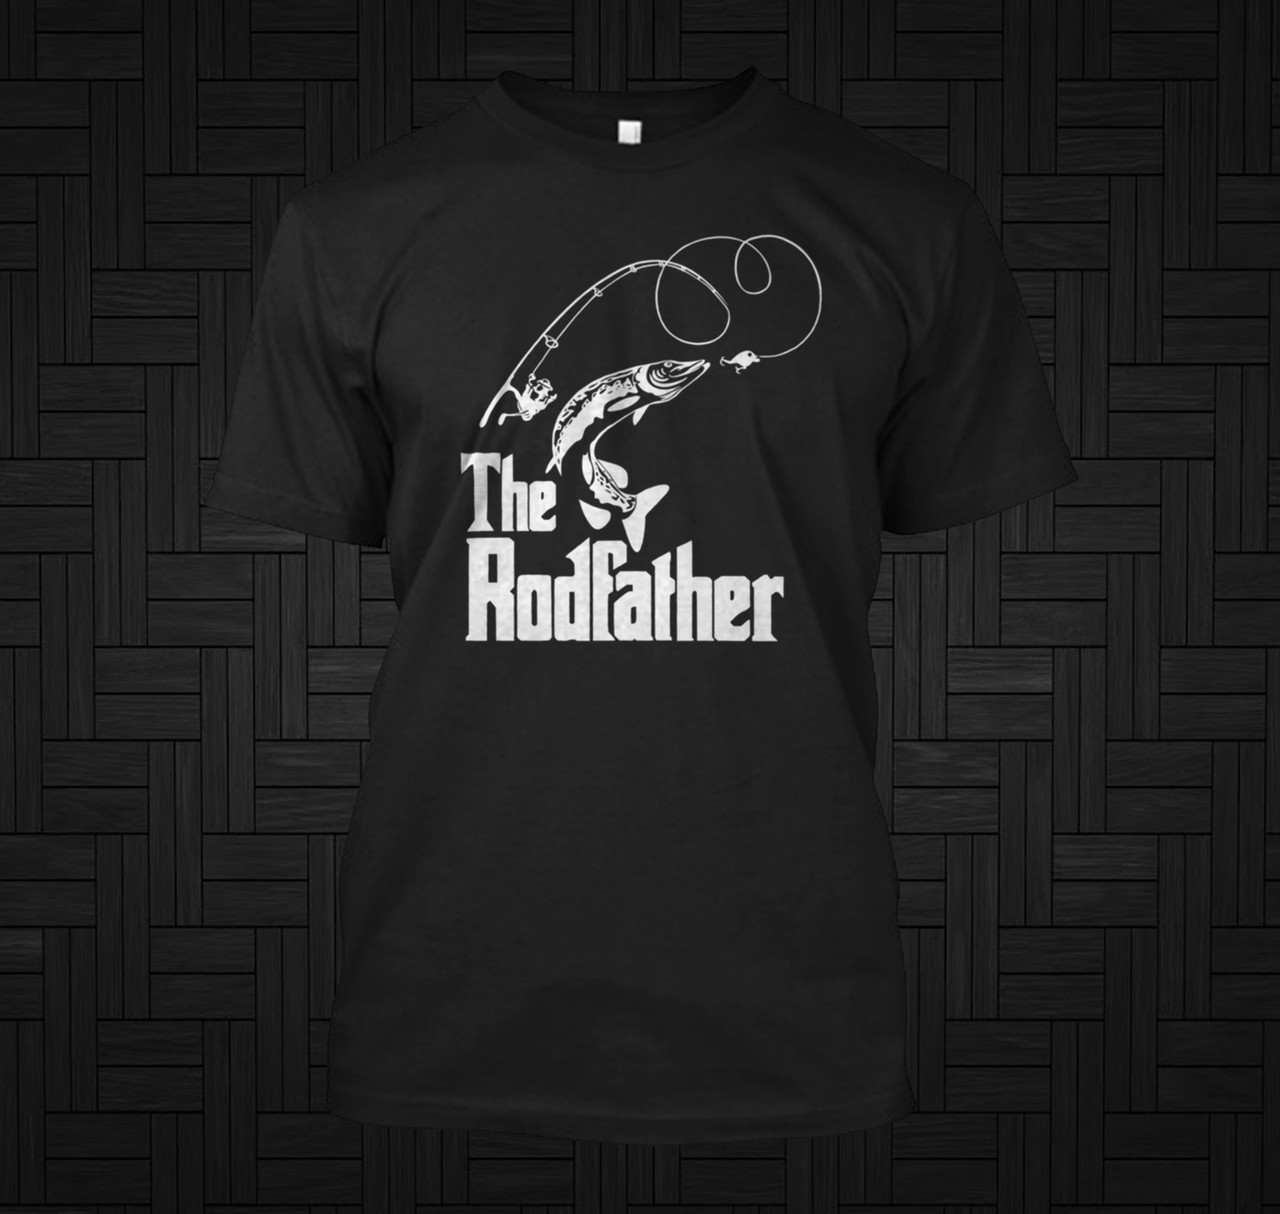 https://cdn11.bigcommerce.com/s-30hlsgjlwx/images/stencil/1280x1280/products/1185/5003/The_Rodfather_Fishing_black_T-Shirt__48518.1705204669.jpg?c=1